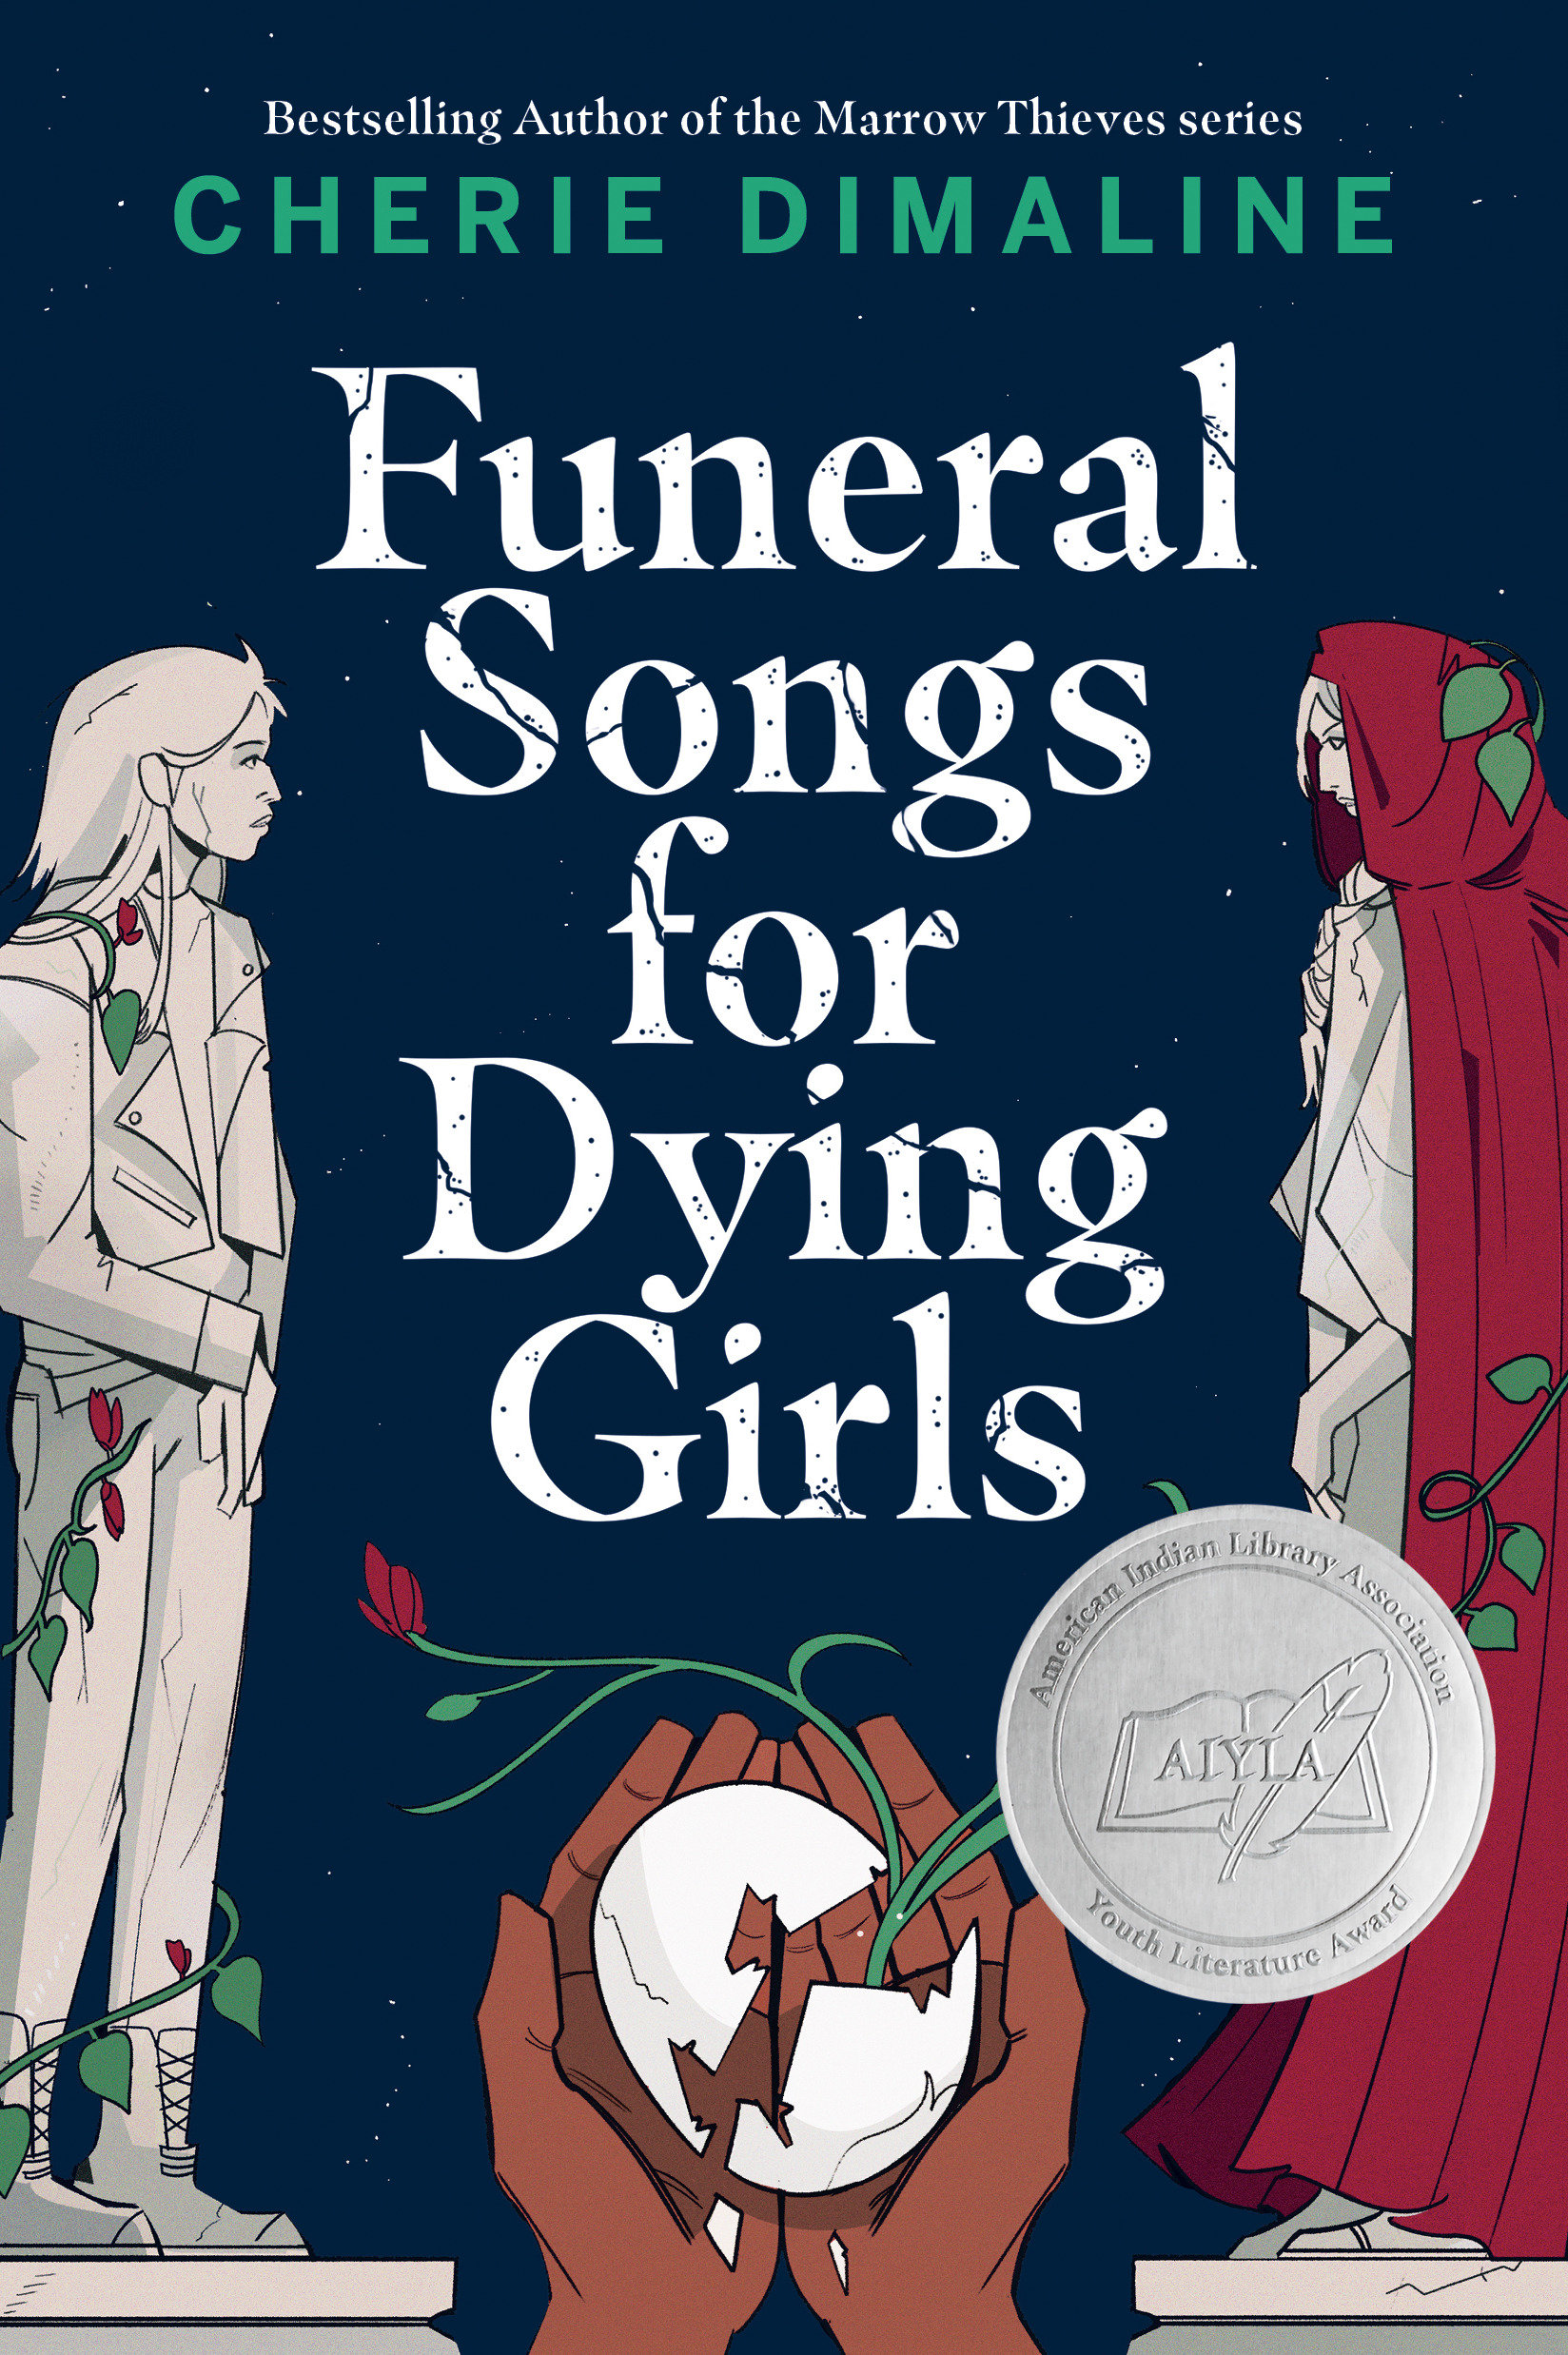 Funeral Songs for Dying Girls (Hardcover Book)